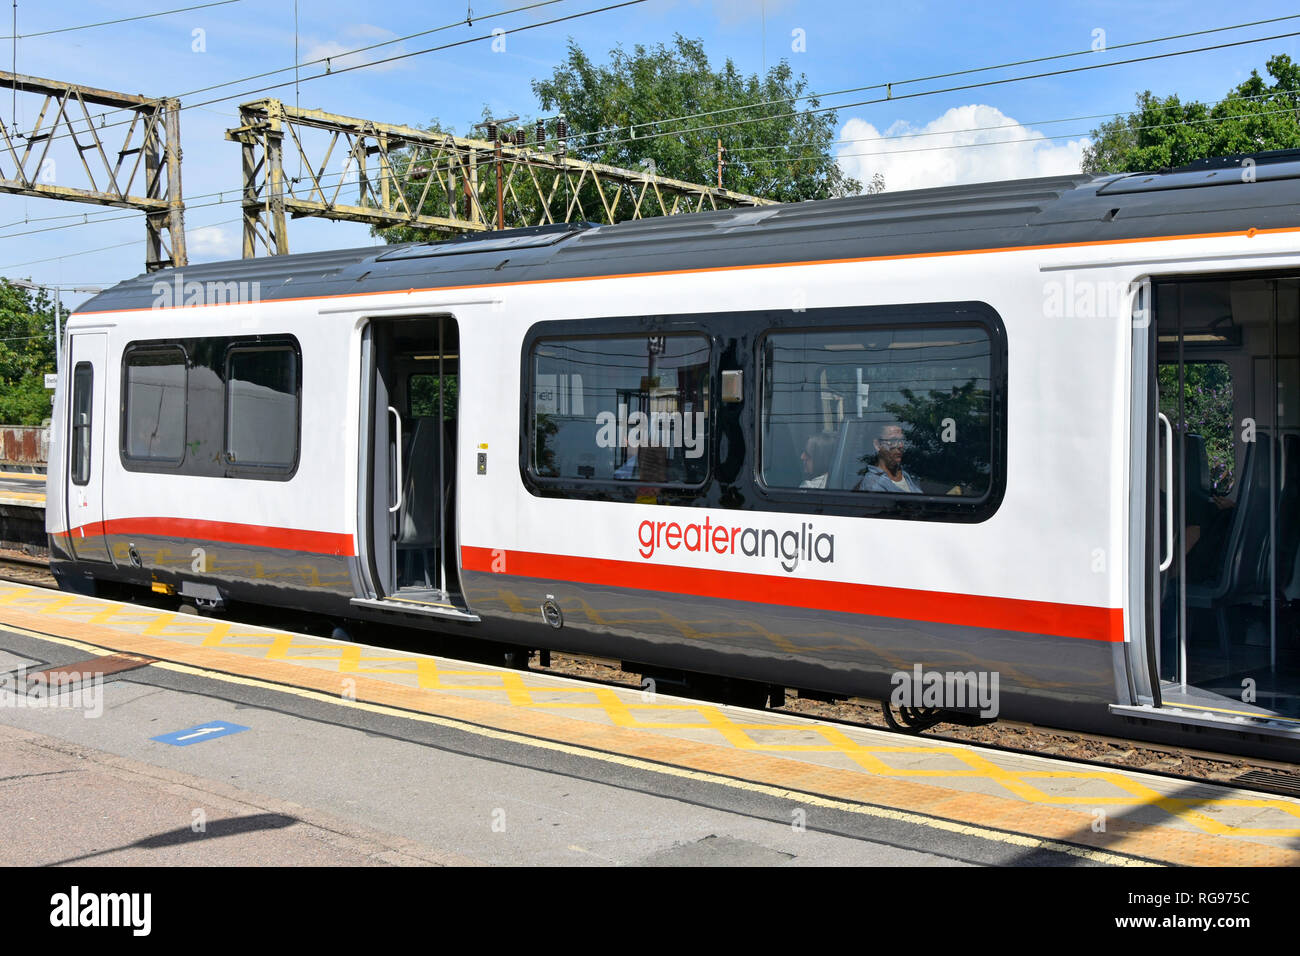 Greater Anglia commuter train with passenger access doors open waiting at platform to leave Shenfield near Brentwood railway station Essex England UK Stock Photo